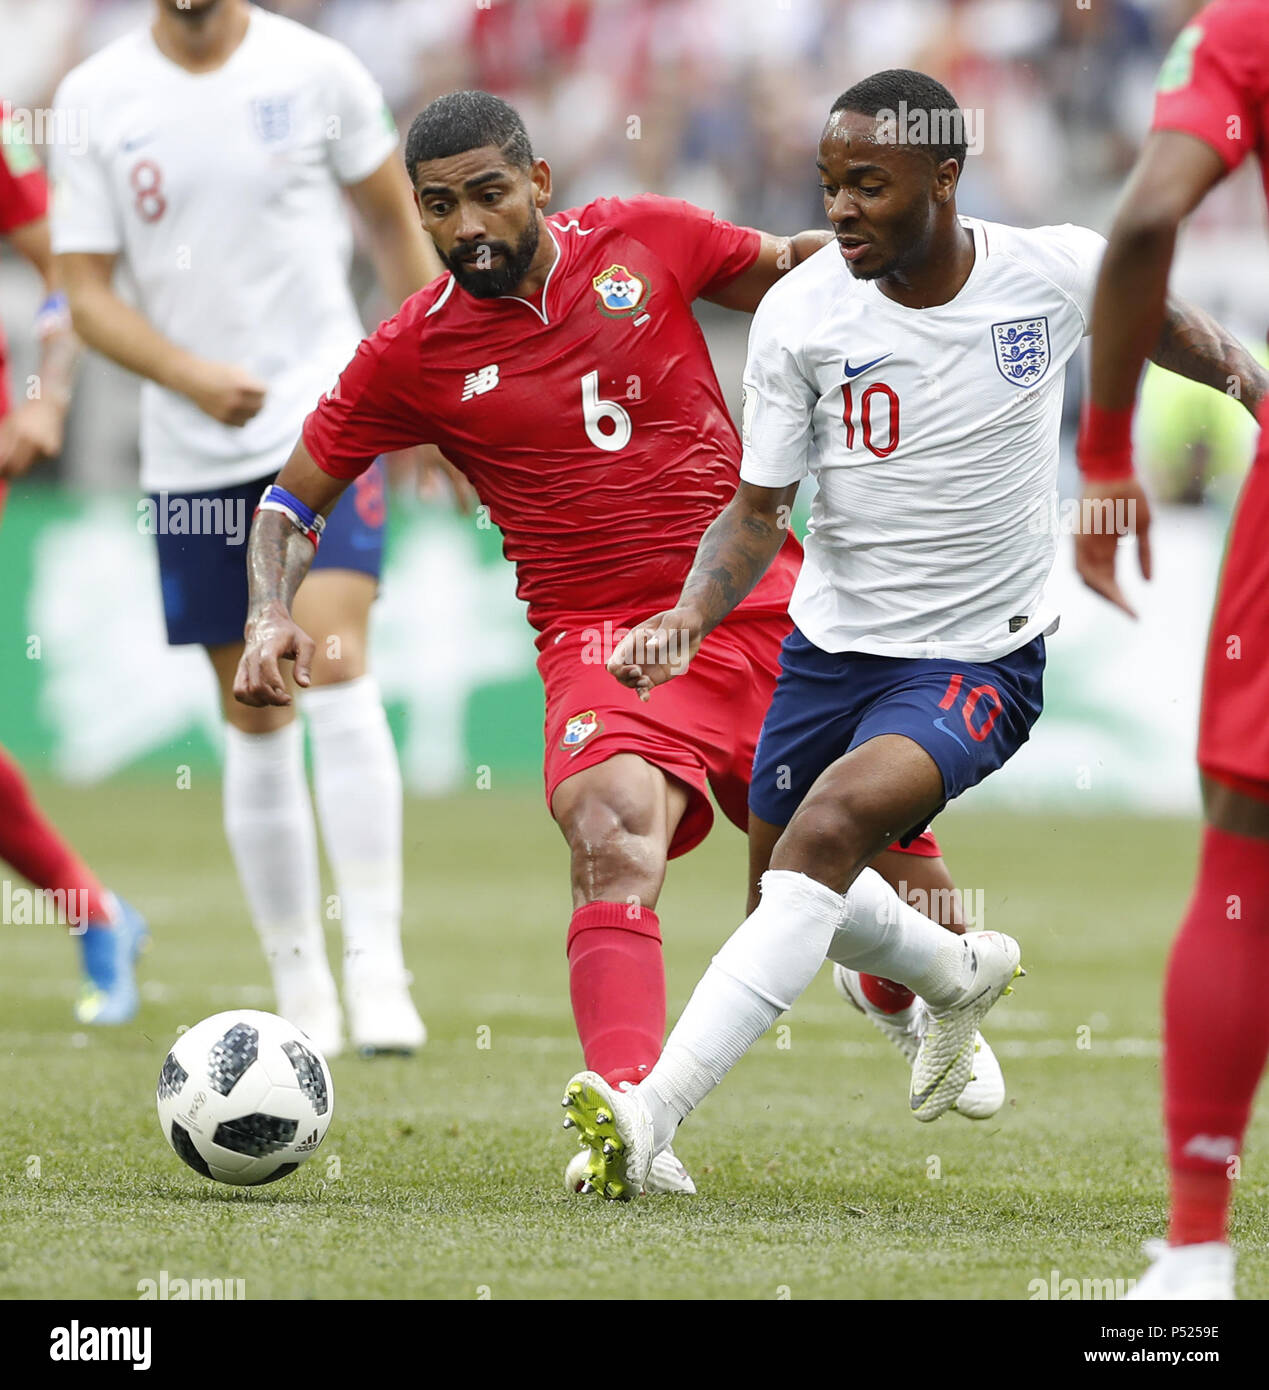 Nizhny Govgorod, Russia. 24th June, 2018. Raheem Sterling (R) of England vies with Gabriel Gomez of Panama during the 2018 FIFA World Cup Group G match between England and Panama in Nizhny Govgorod, Russia, June 24, 2018. Credit: Cao Can/Xinhua/Alamy Live News Stock Photo